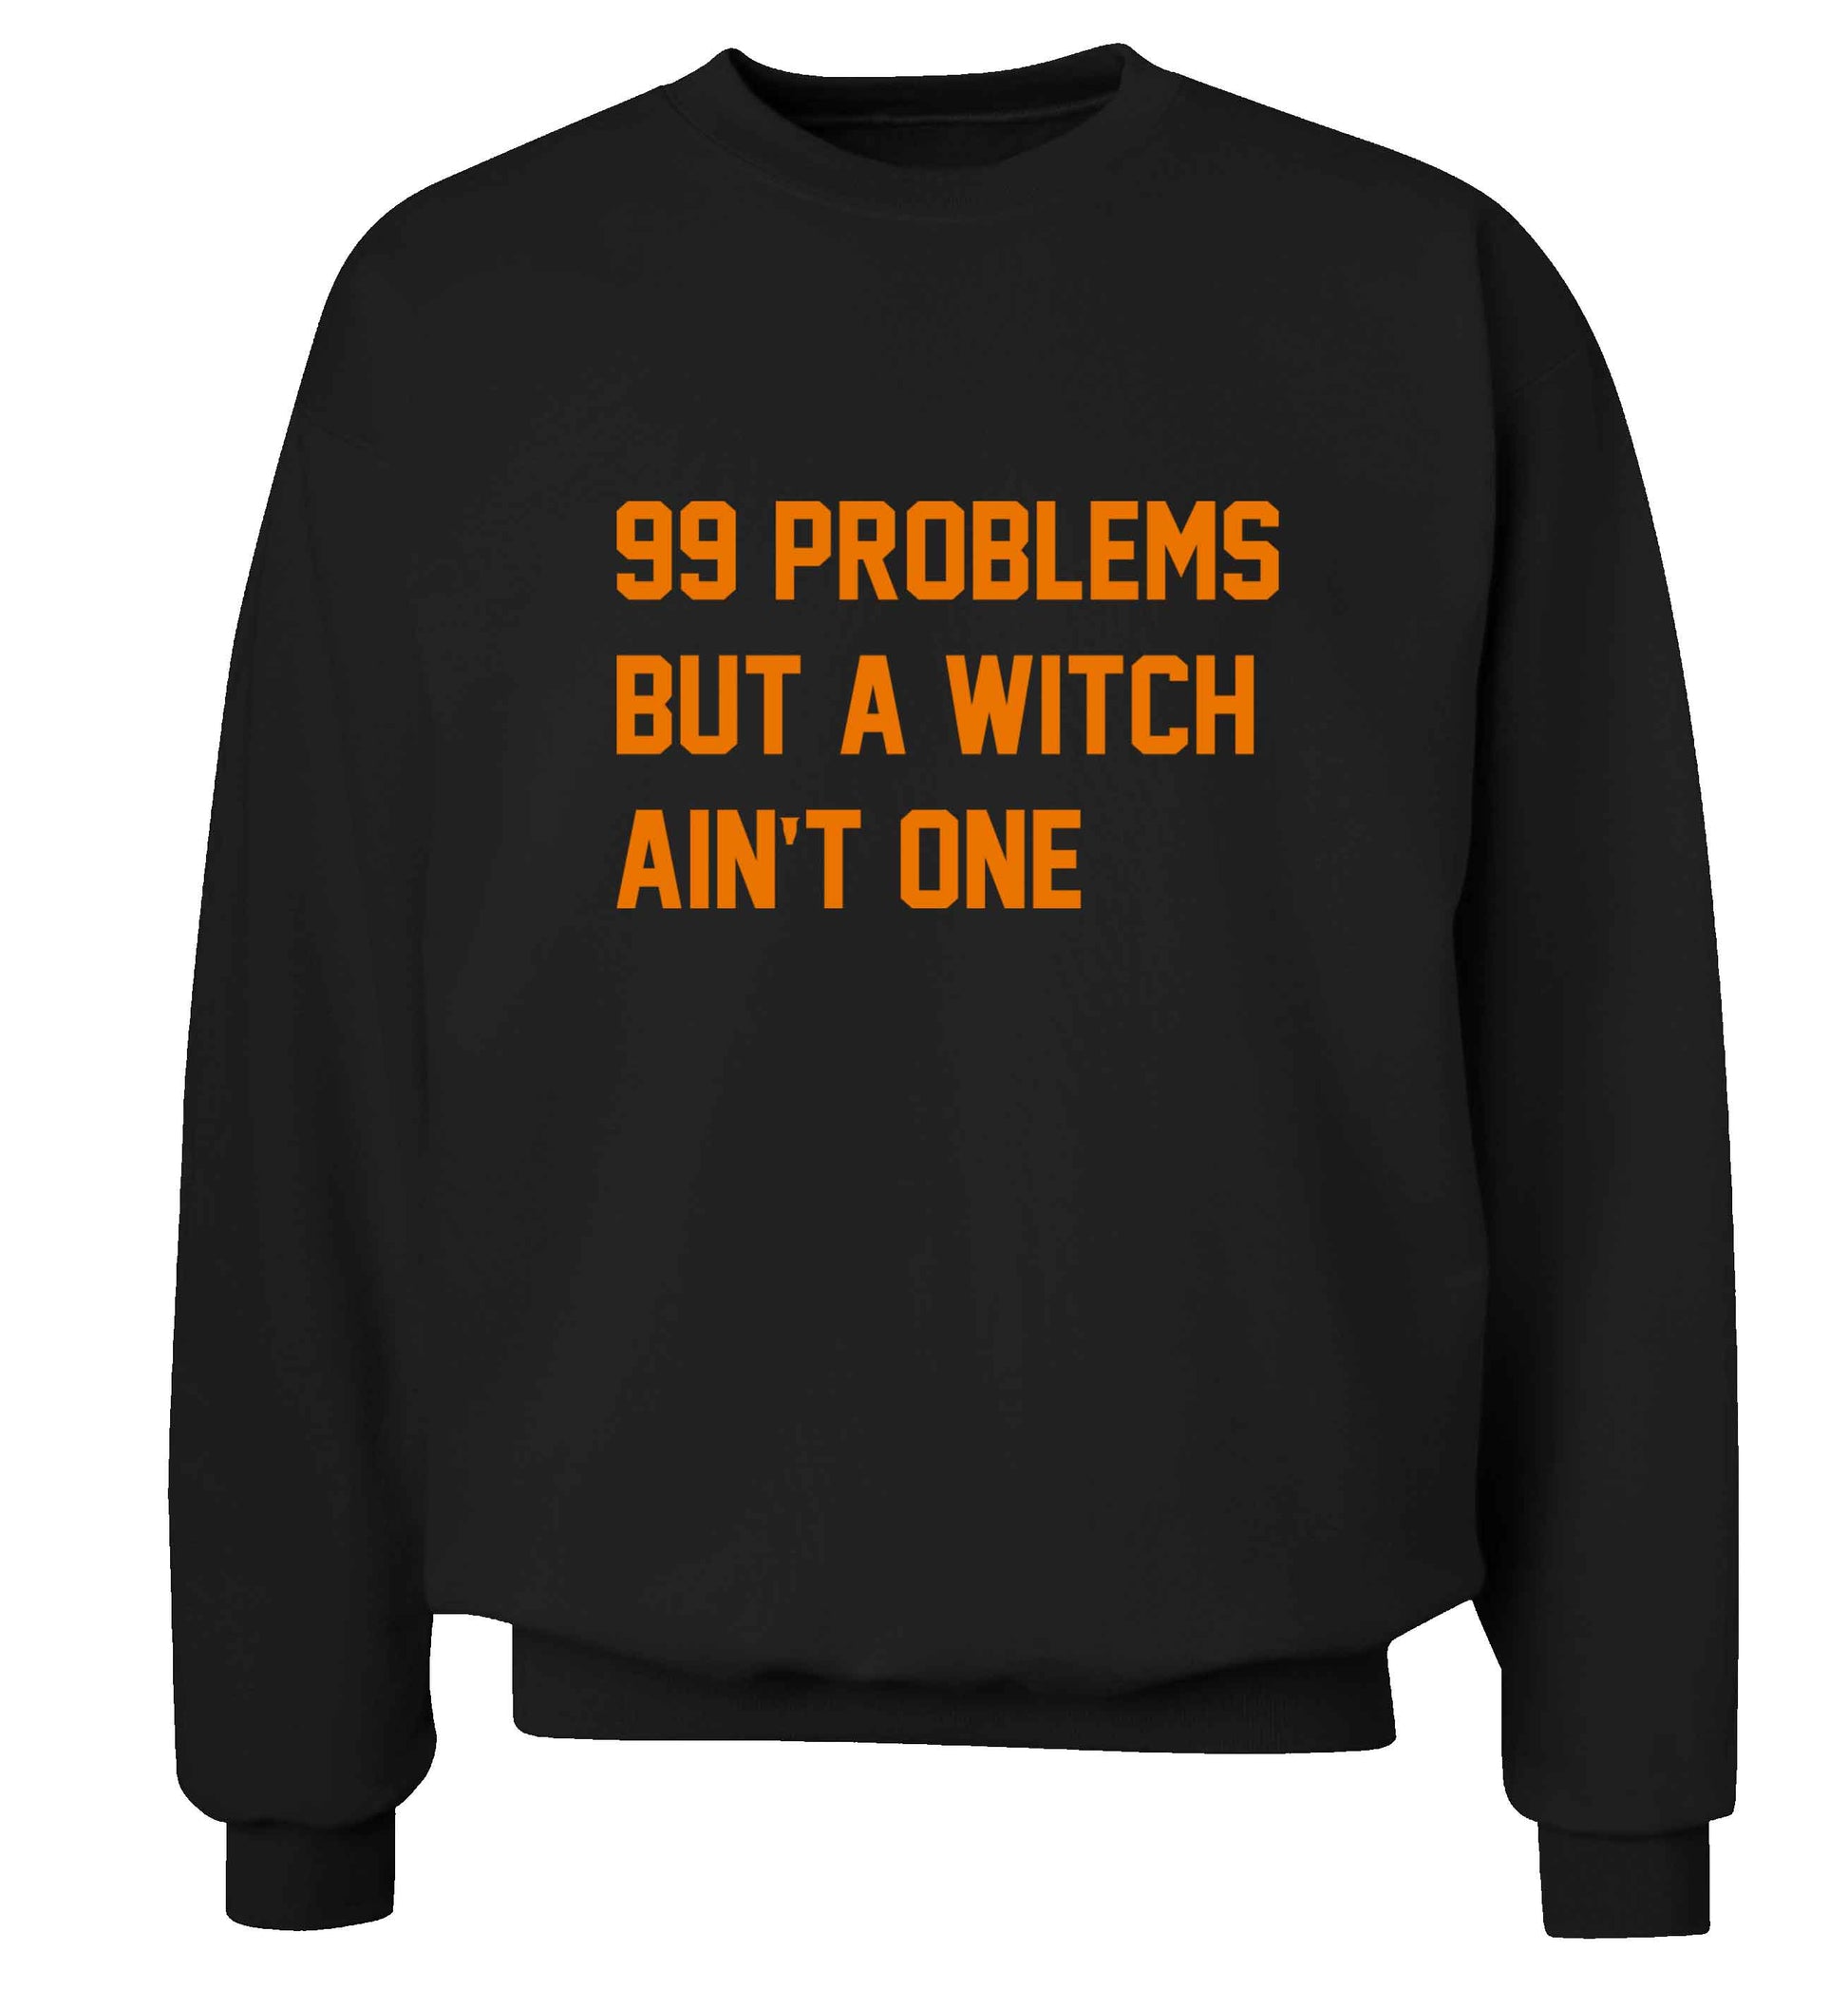 99 Problems but a witch aint one adult's unisex black sweater 2XL